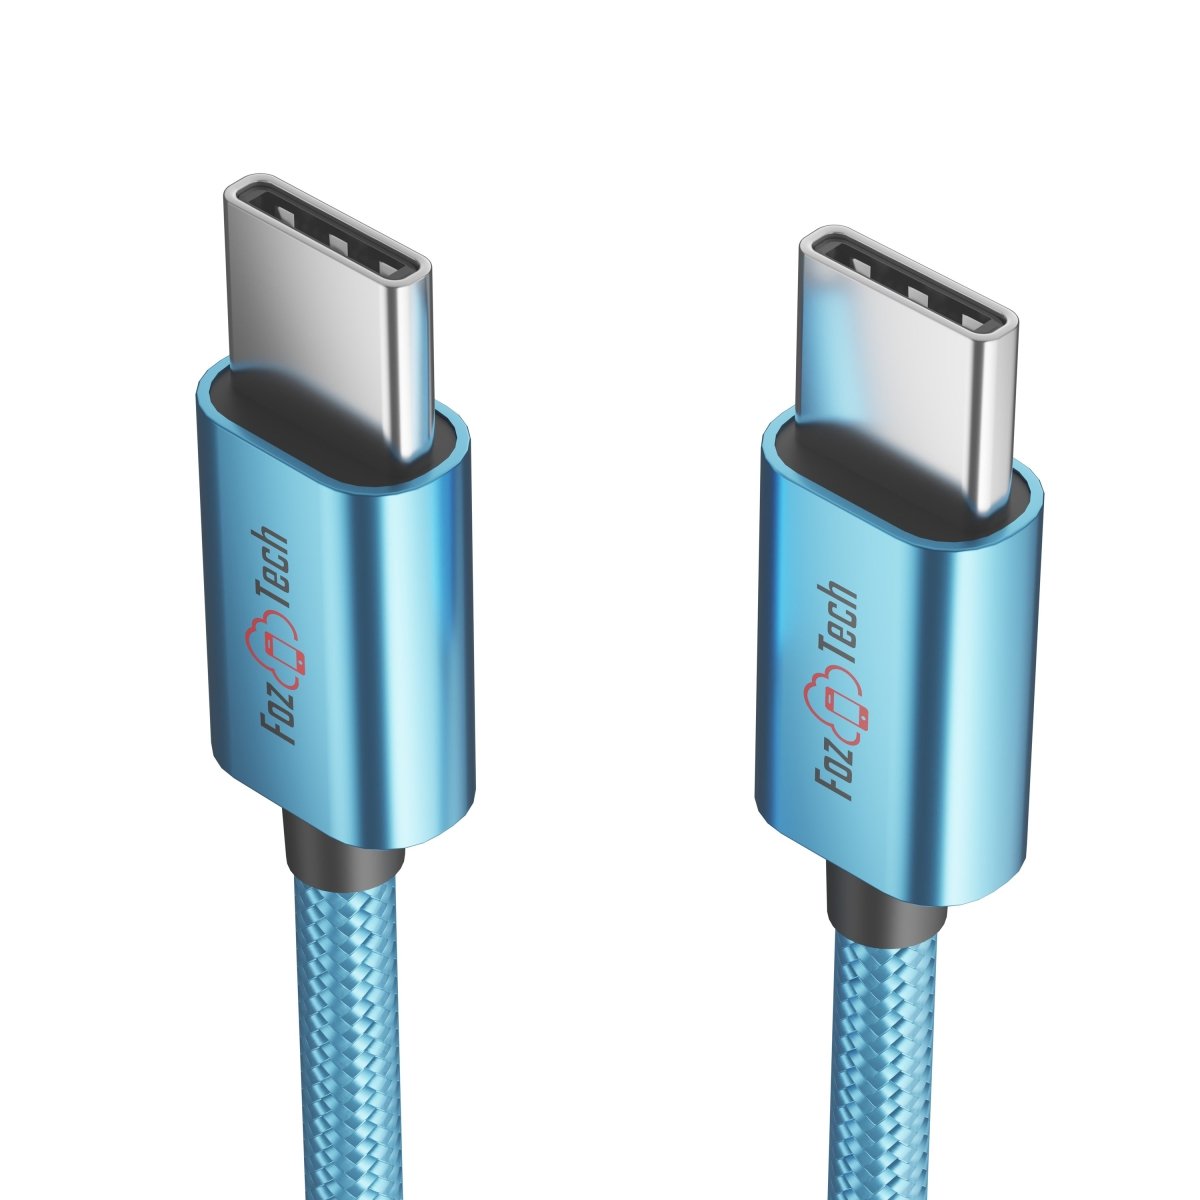 FozTech - CORE Series - USB-C to USB-C Fast Charger USB 2.0 Data Transfer Lead - Blue - USB Cable - FozTech Official Store